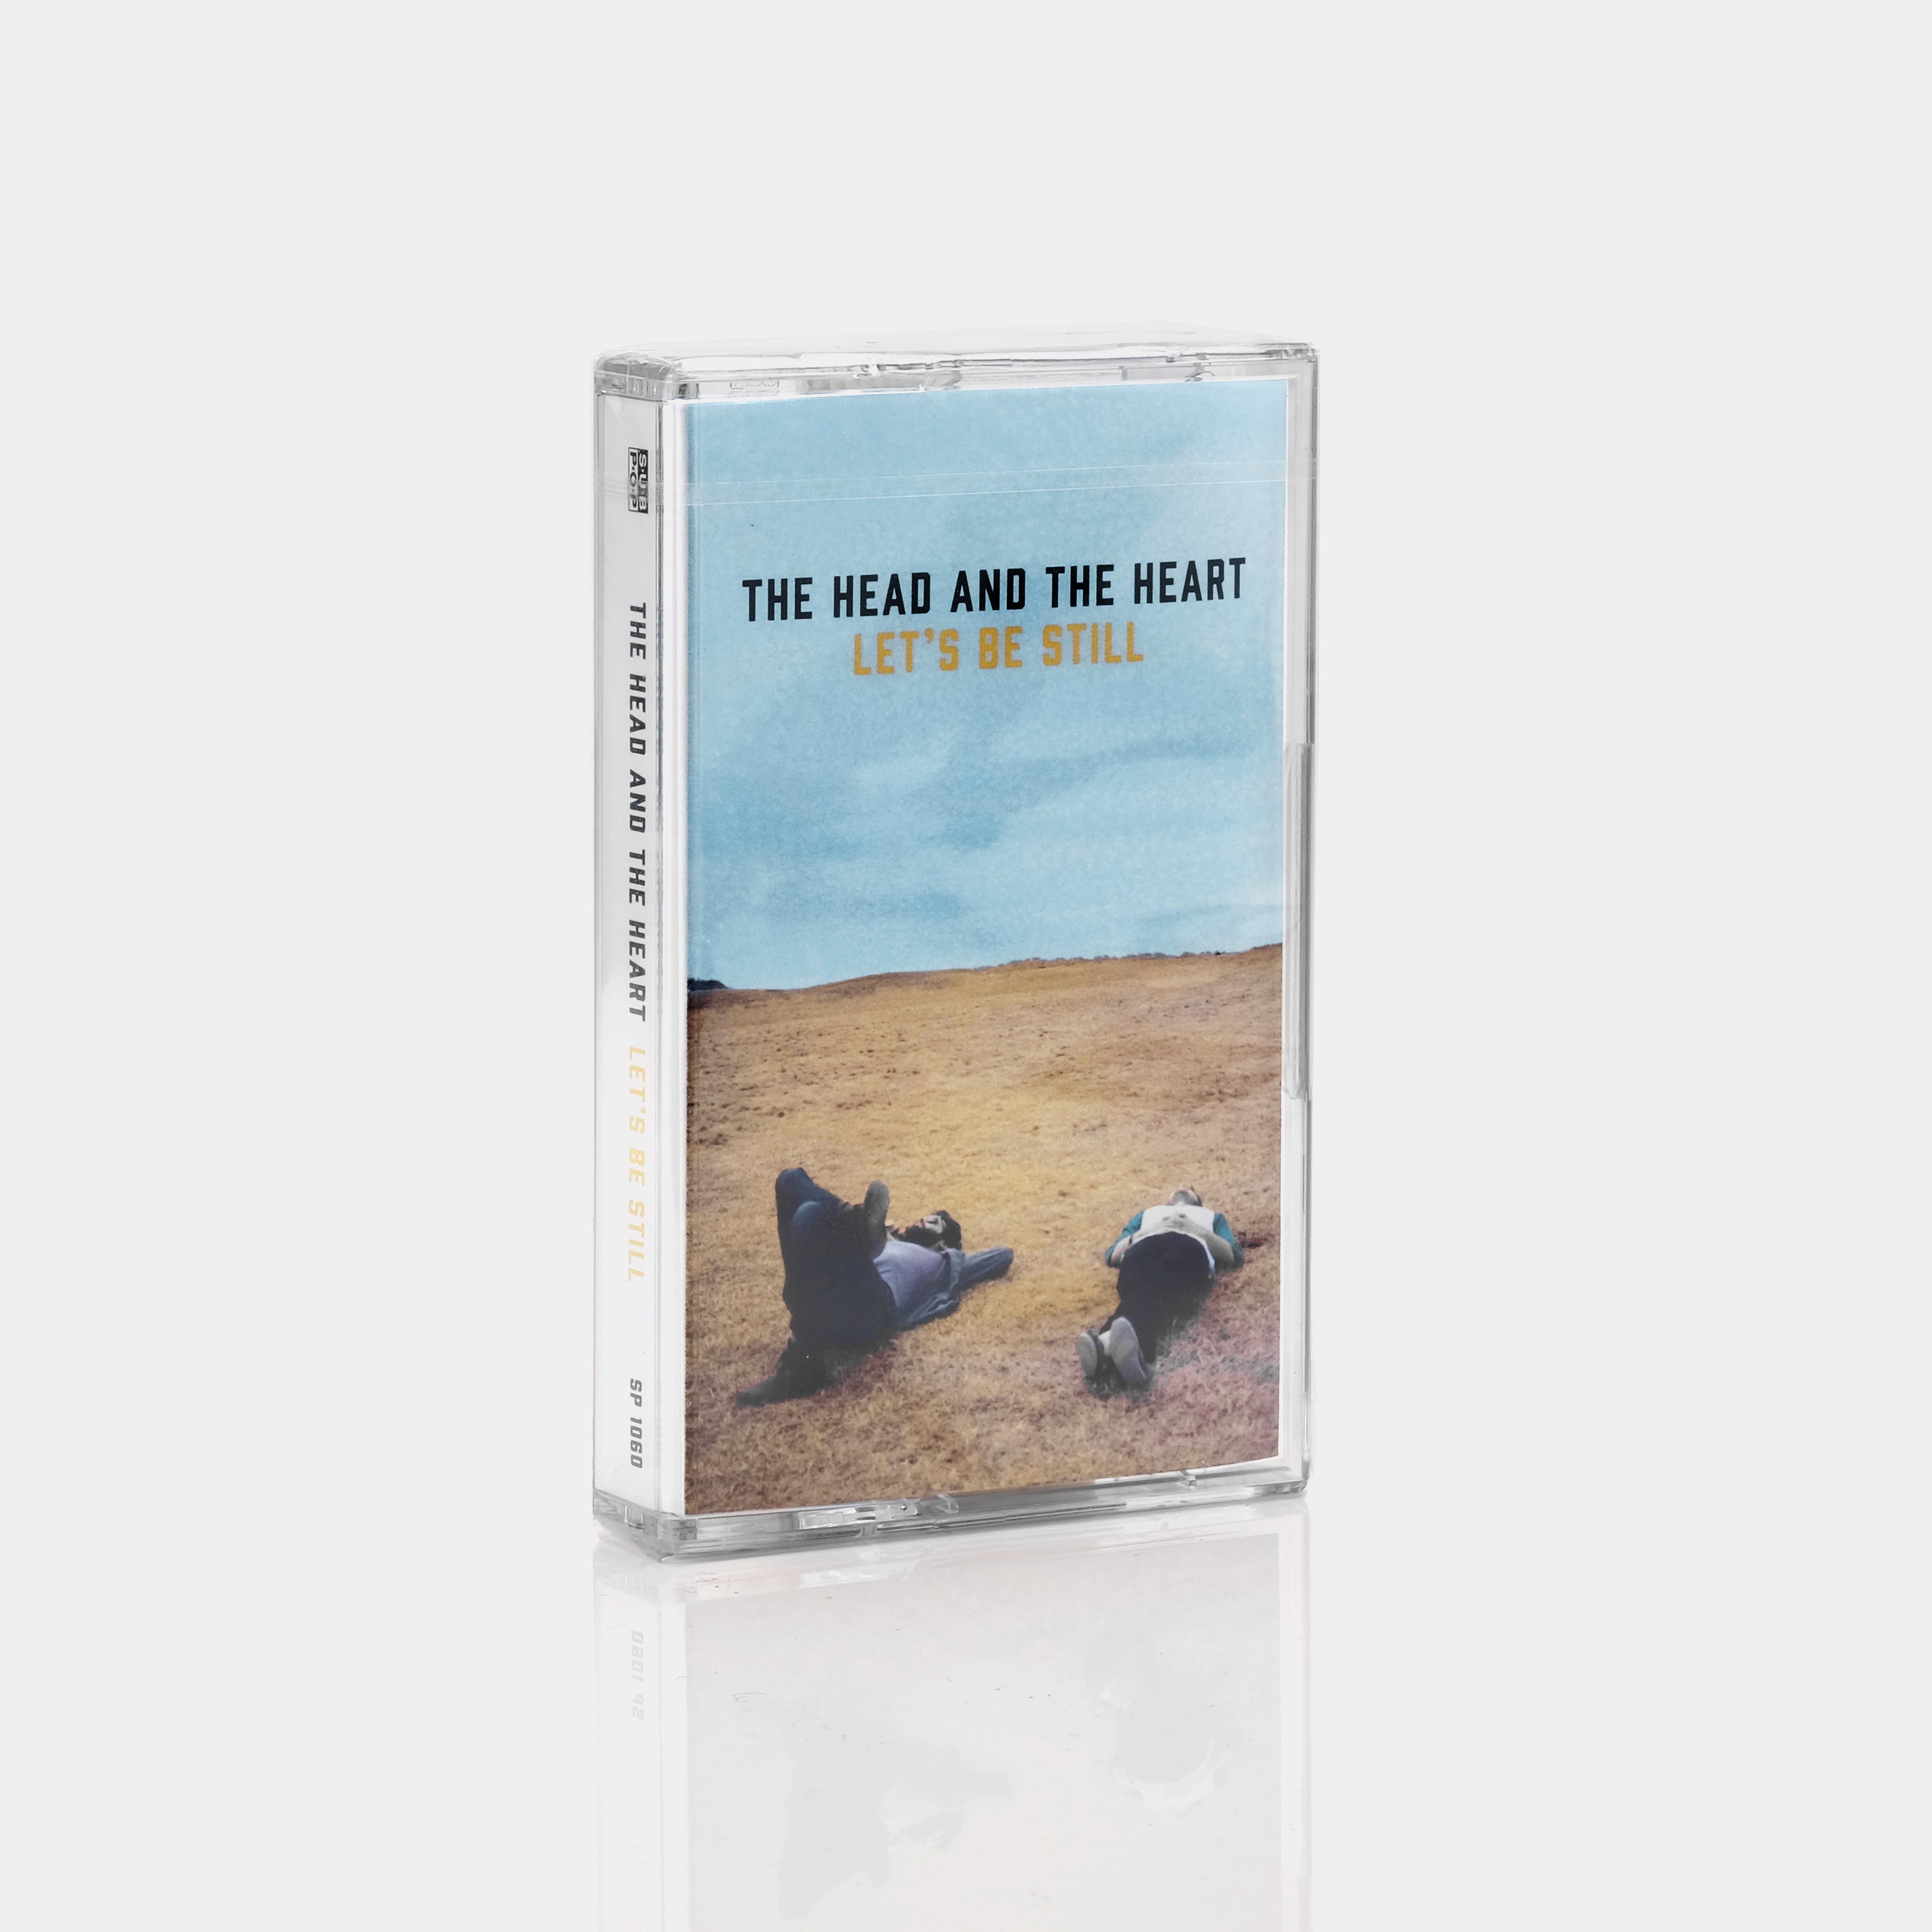 The Head And The Heart - Let's Be Still (Retrospekt Exclusive) Cassette Tape